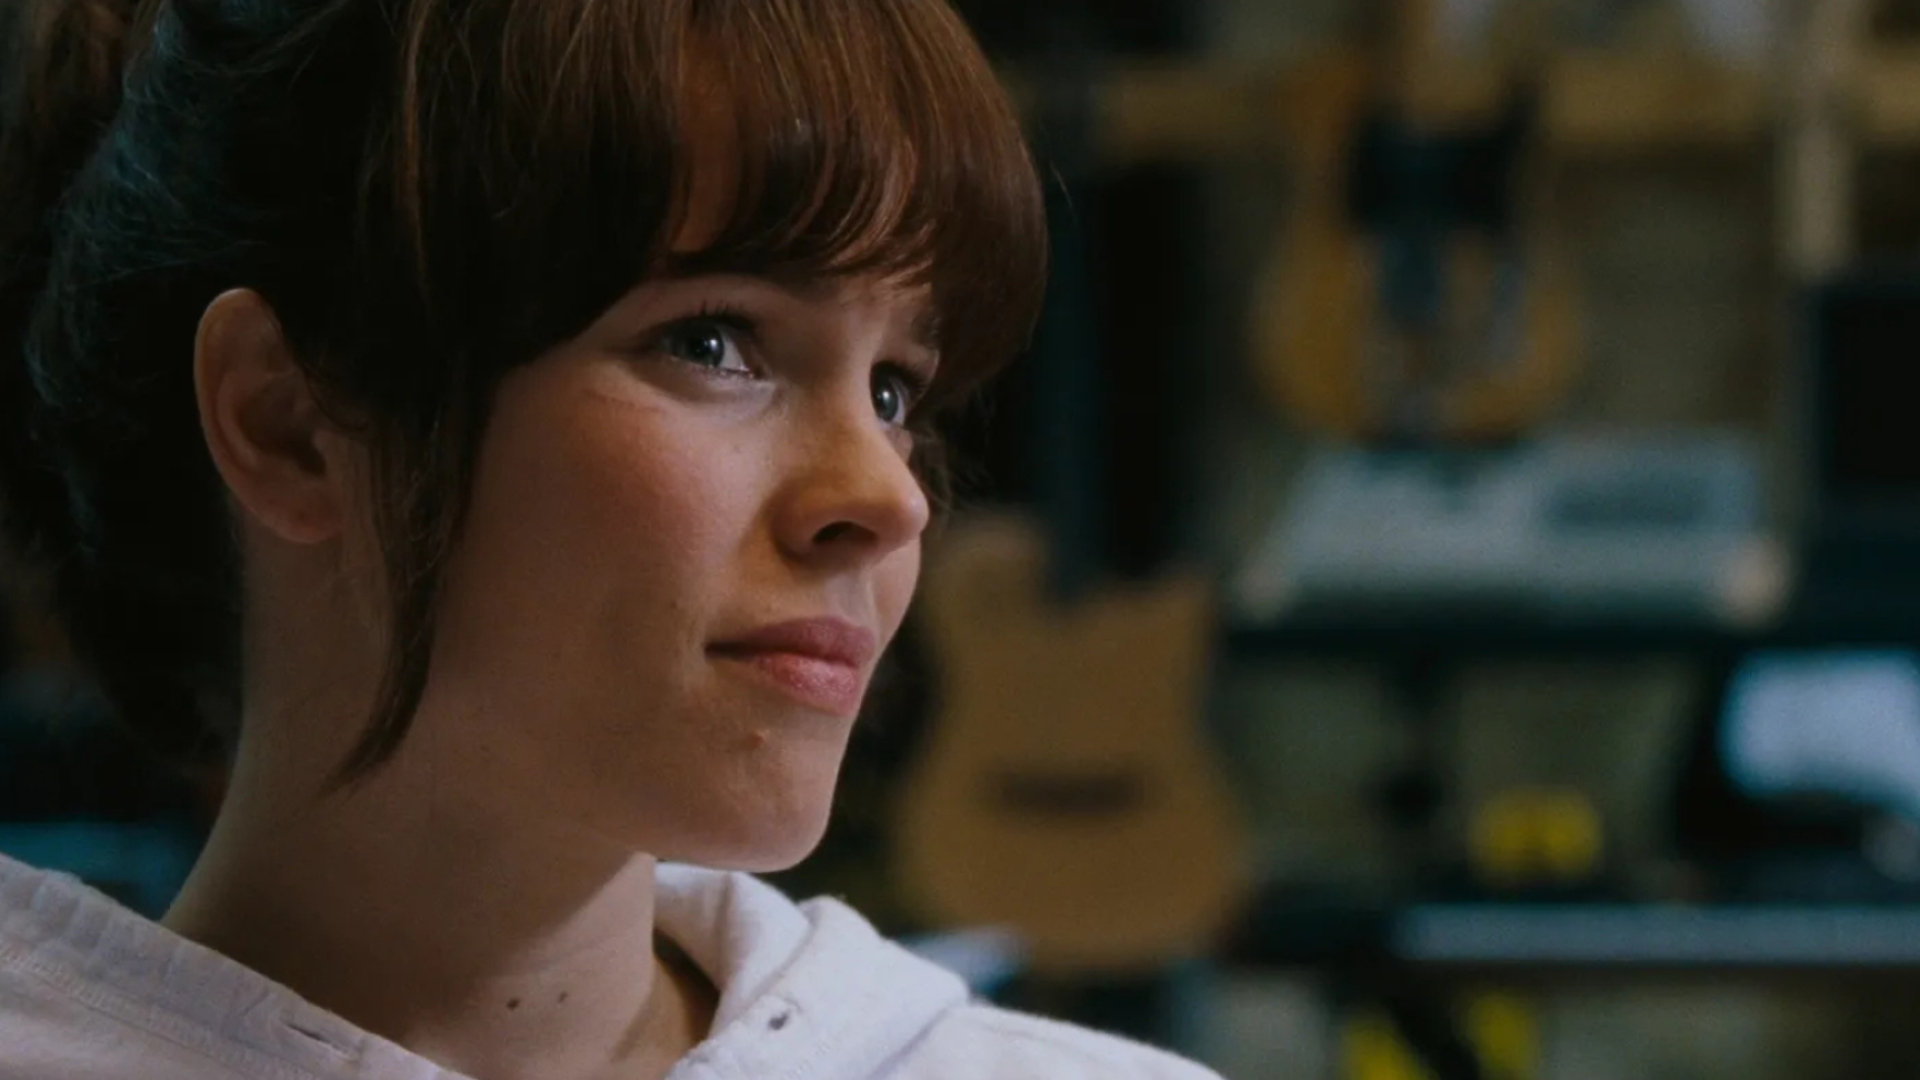 The Vow (Movie): Rachel McAdams as Paige Collins, Amnesia. 1920x1080 Full HD Background.